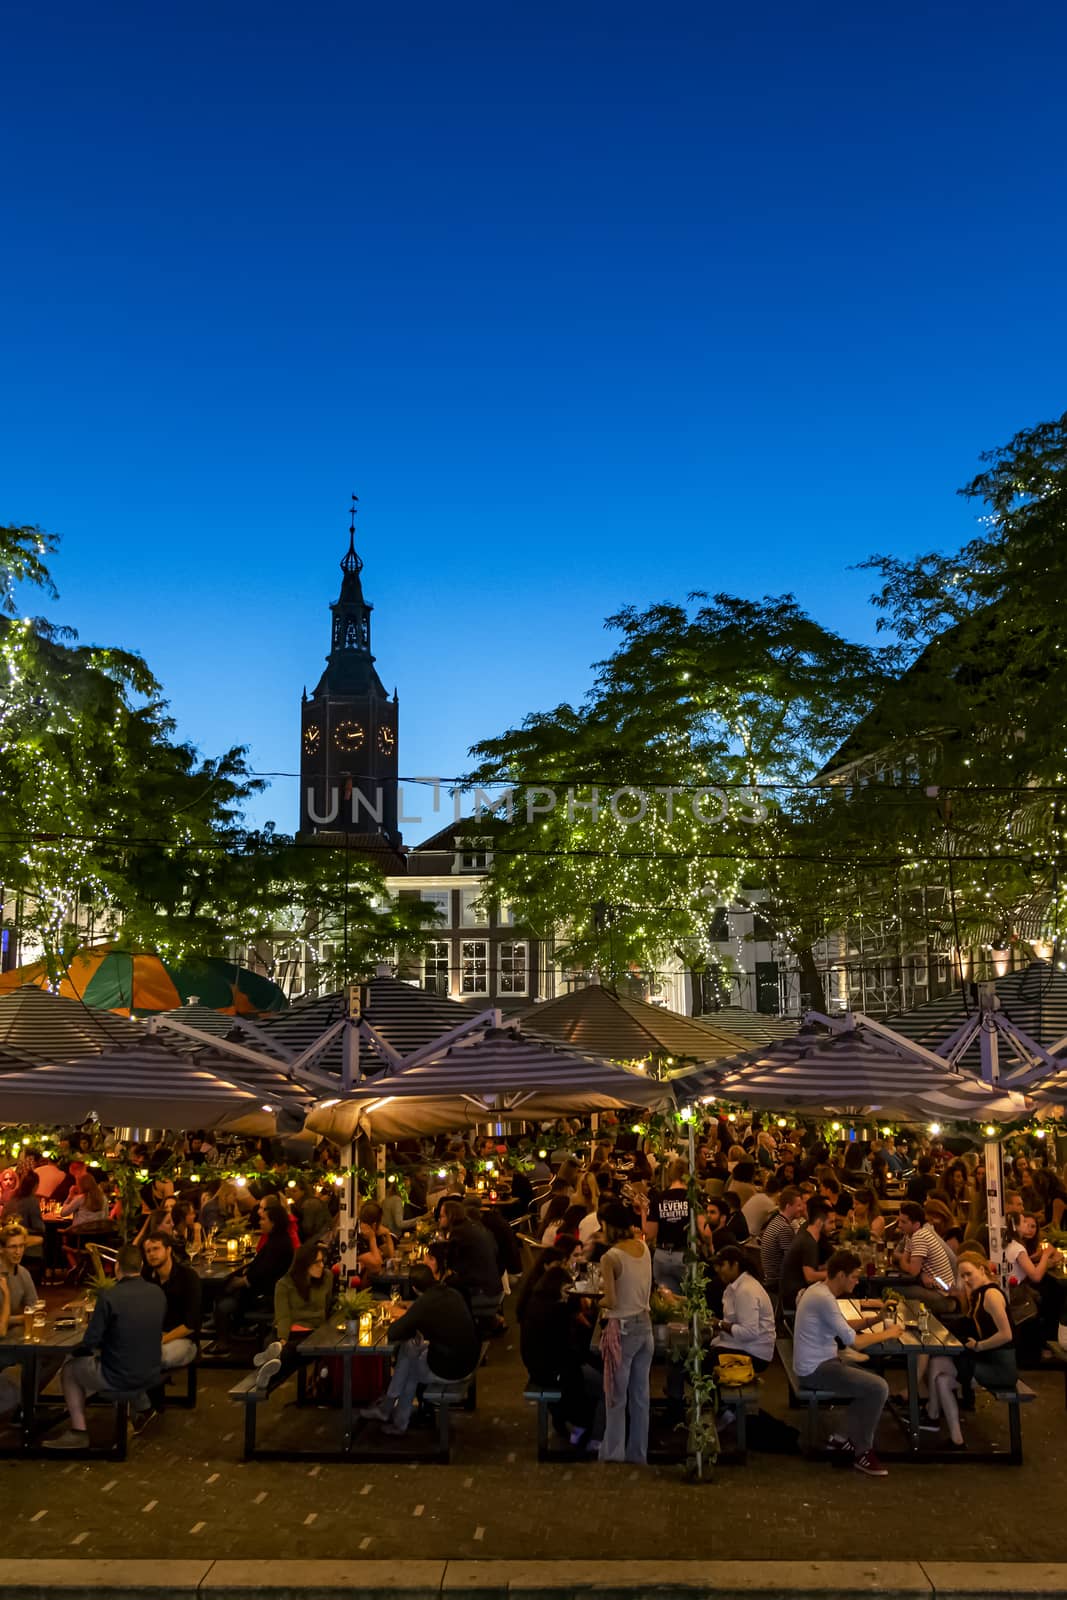 THE HAGUE, 28 June 2019 - City center restaurant bar crowded of people drinking and dining at the blue hour moment